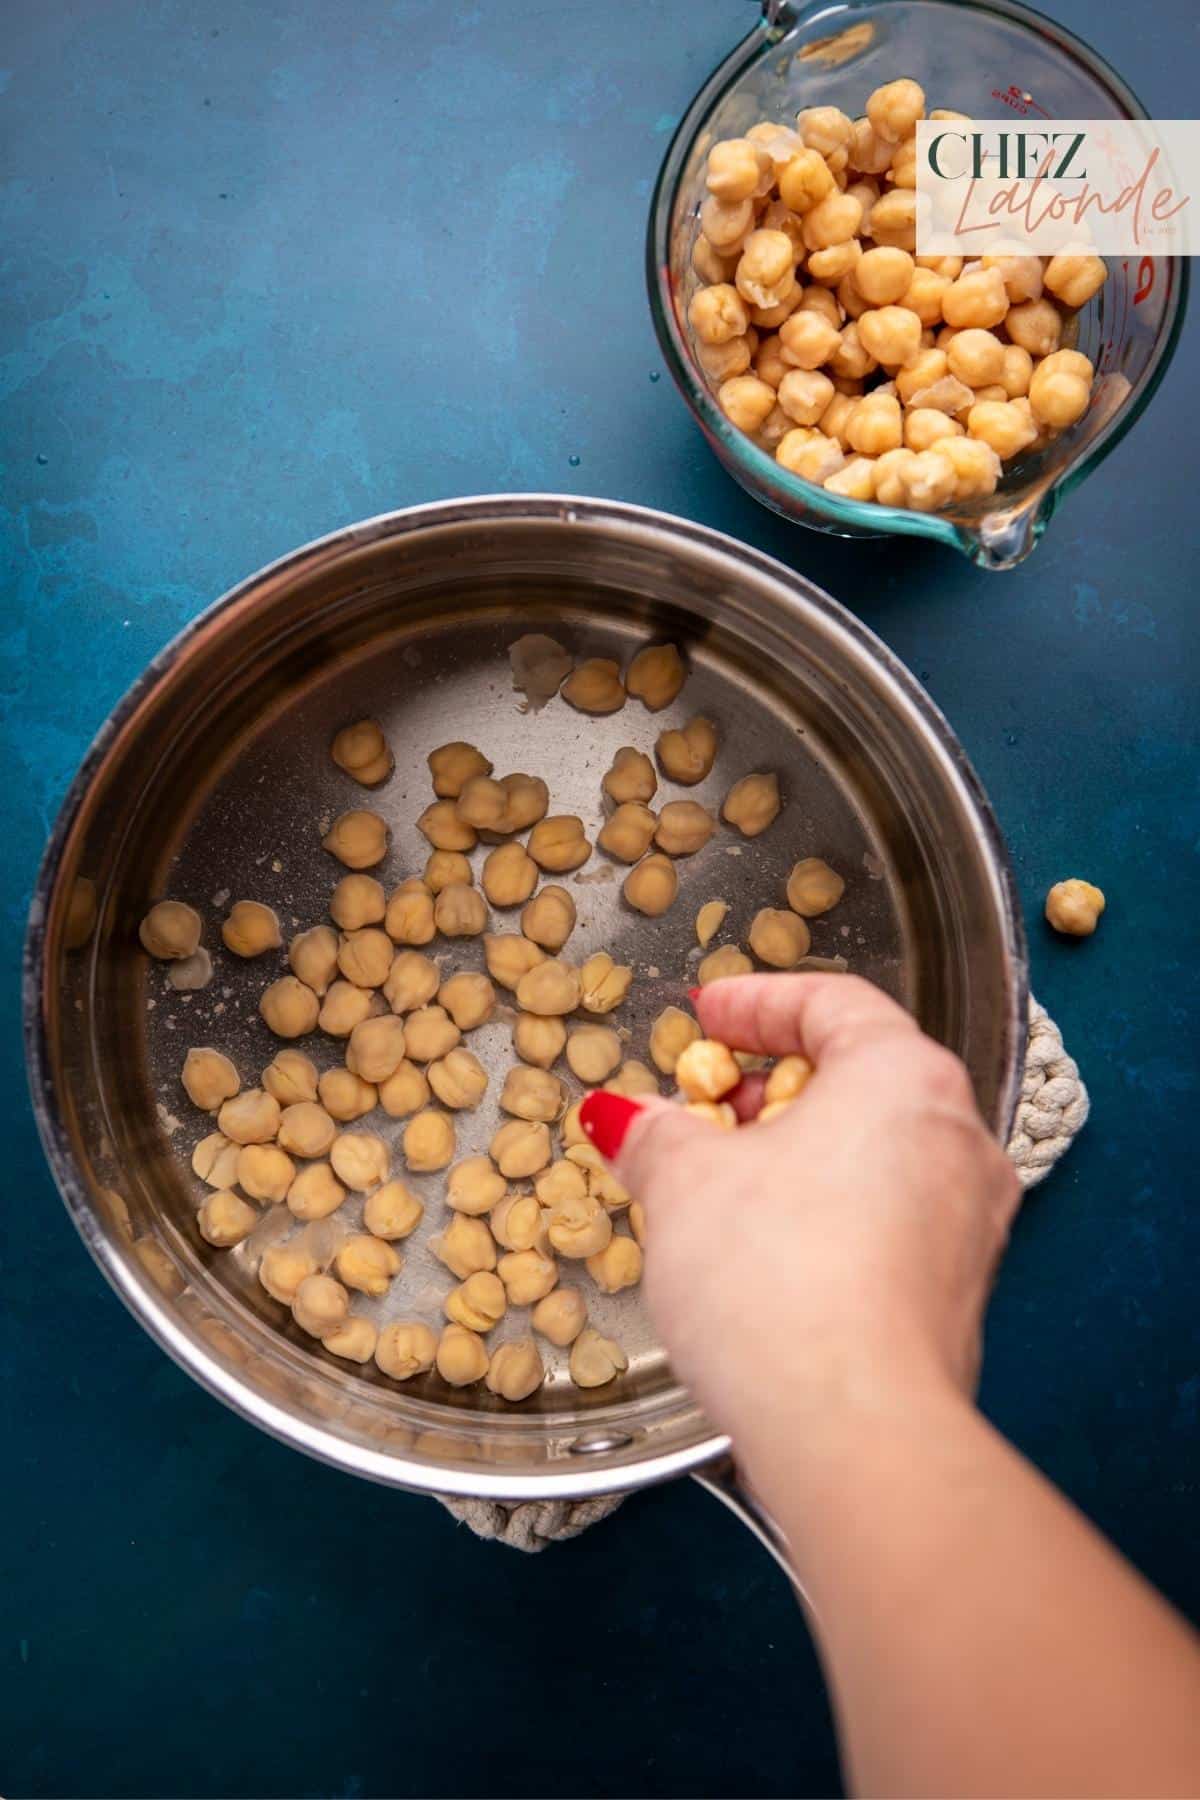 Boiling chickpeas.